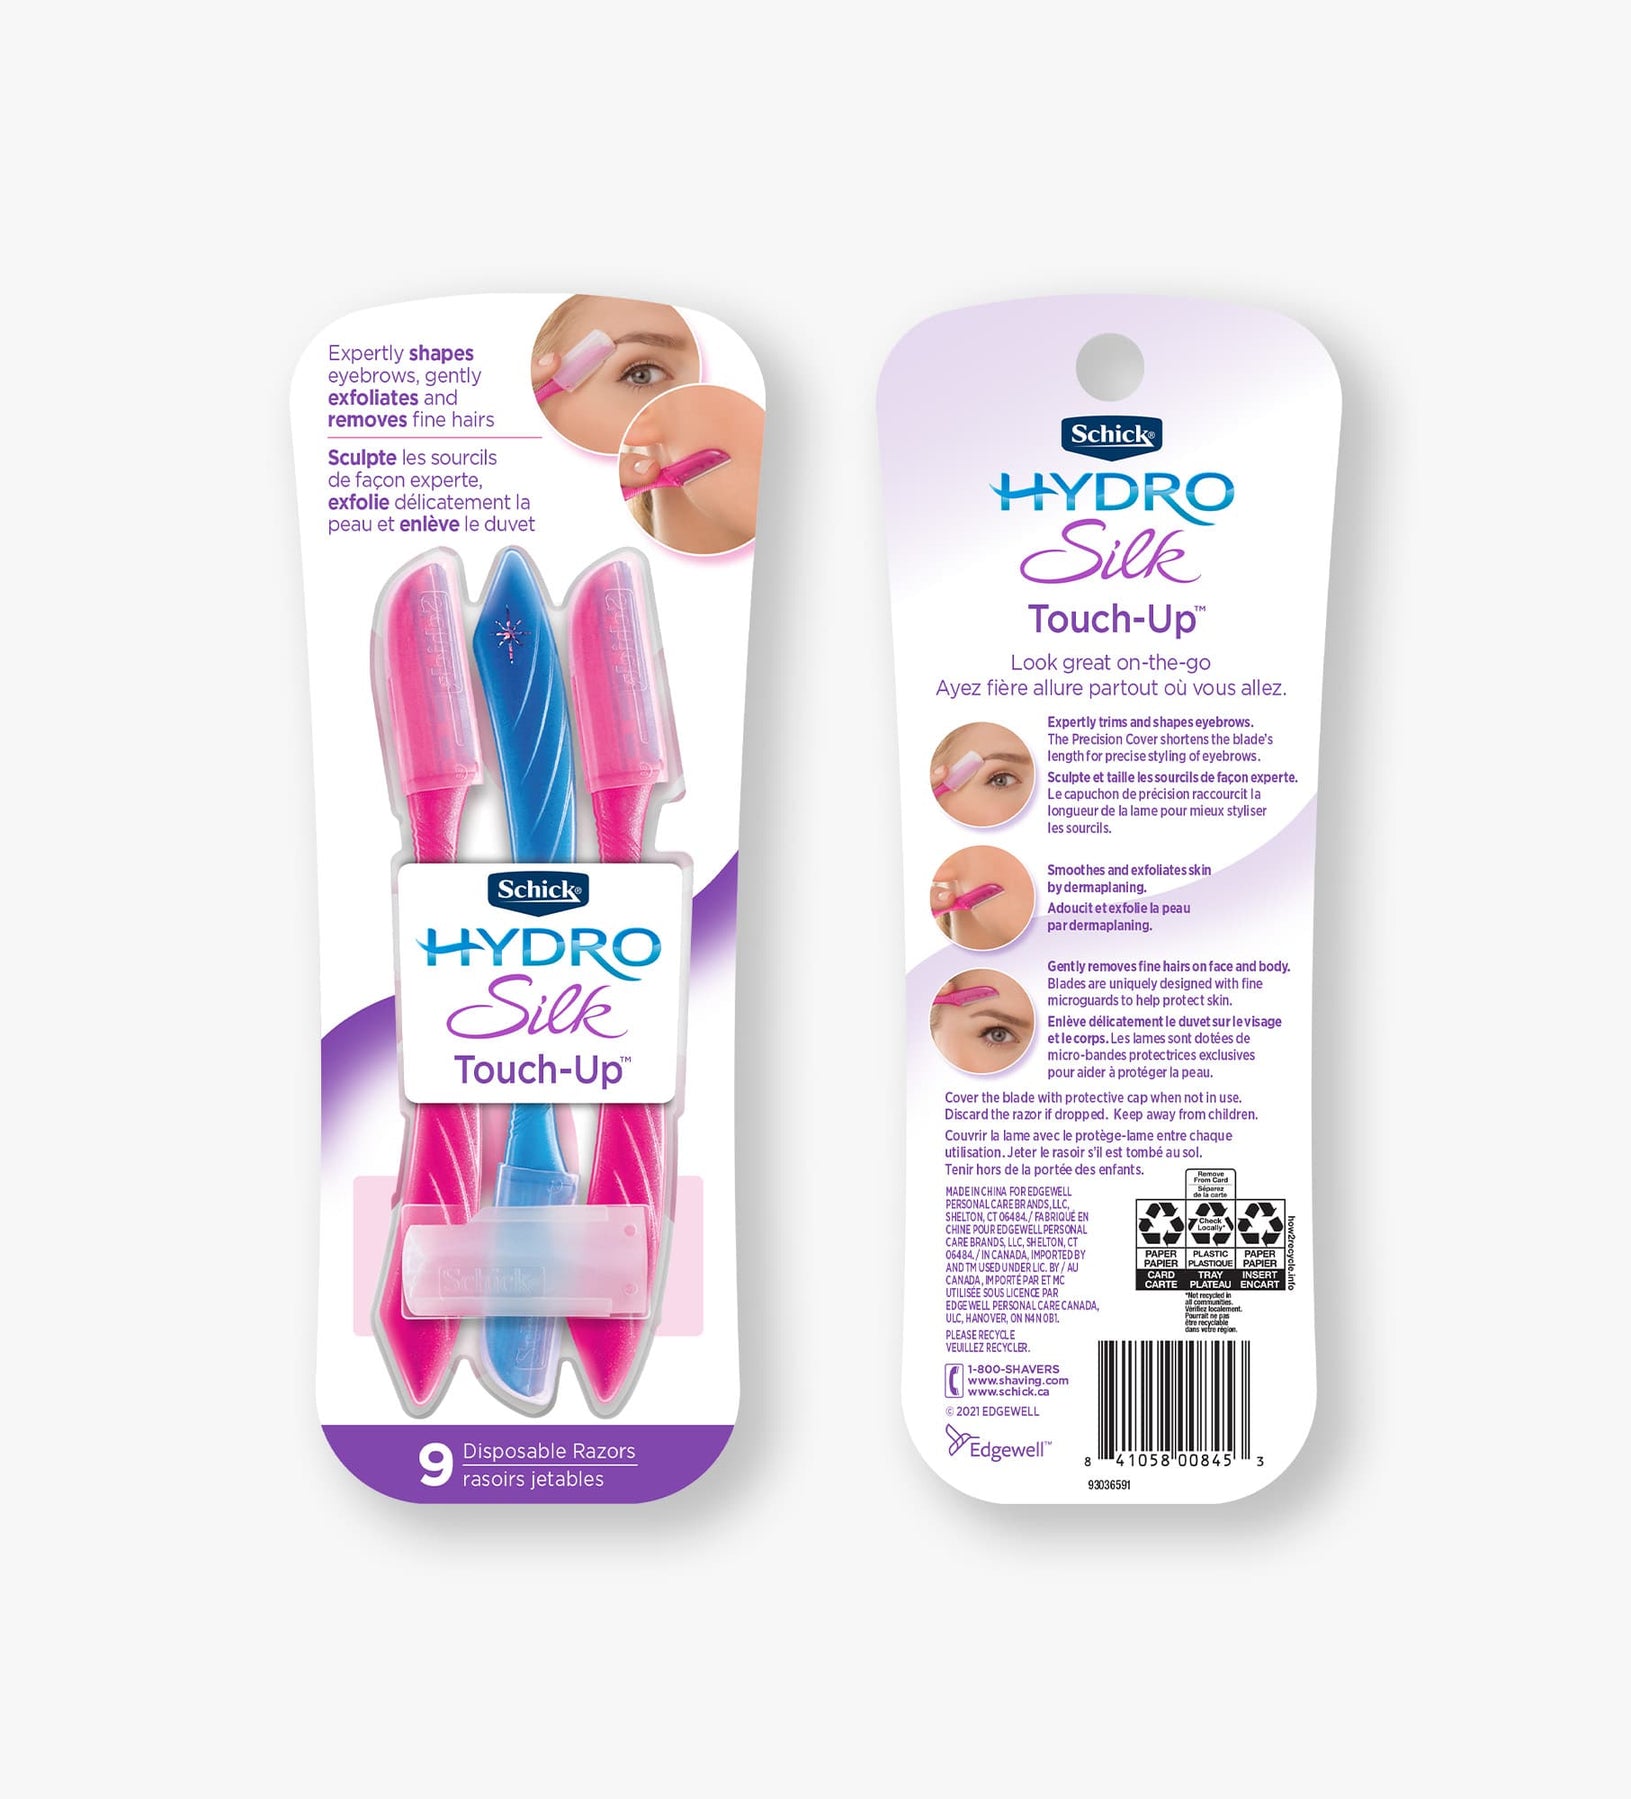 Schick Hydro Silk Touch-Up Dermaplaning Tool